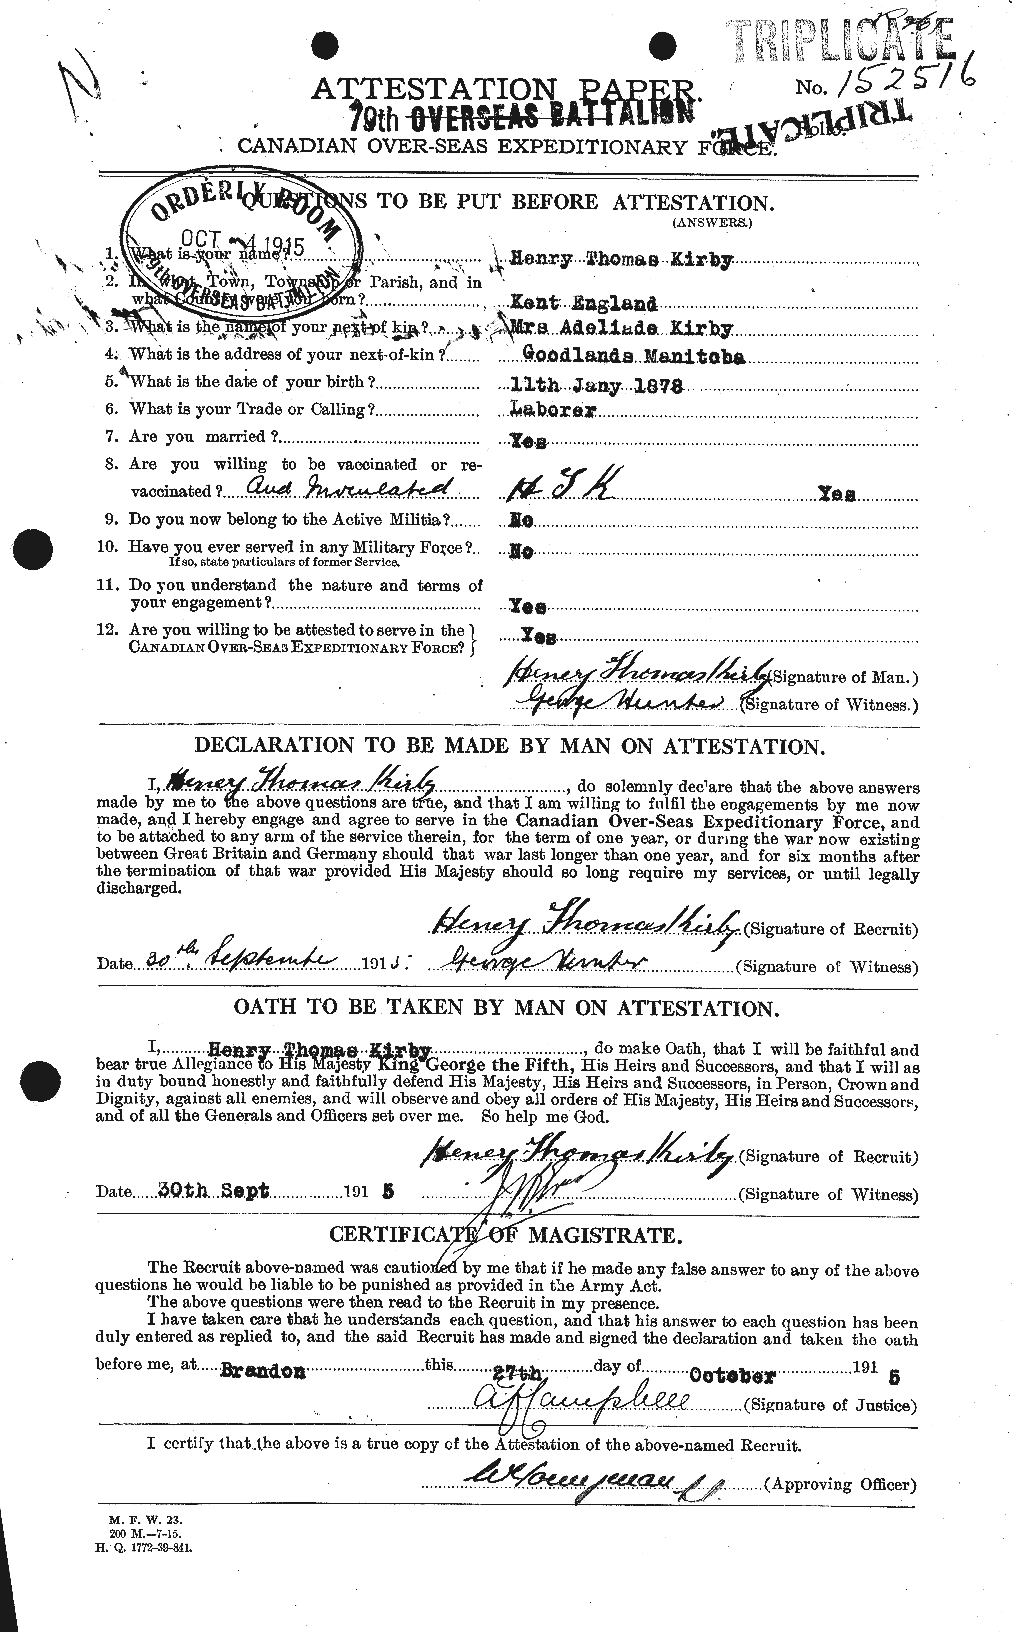 Personnel Records of the First World War - CEF 437211a